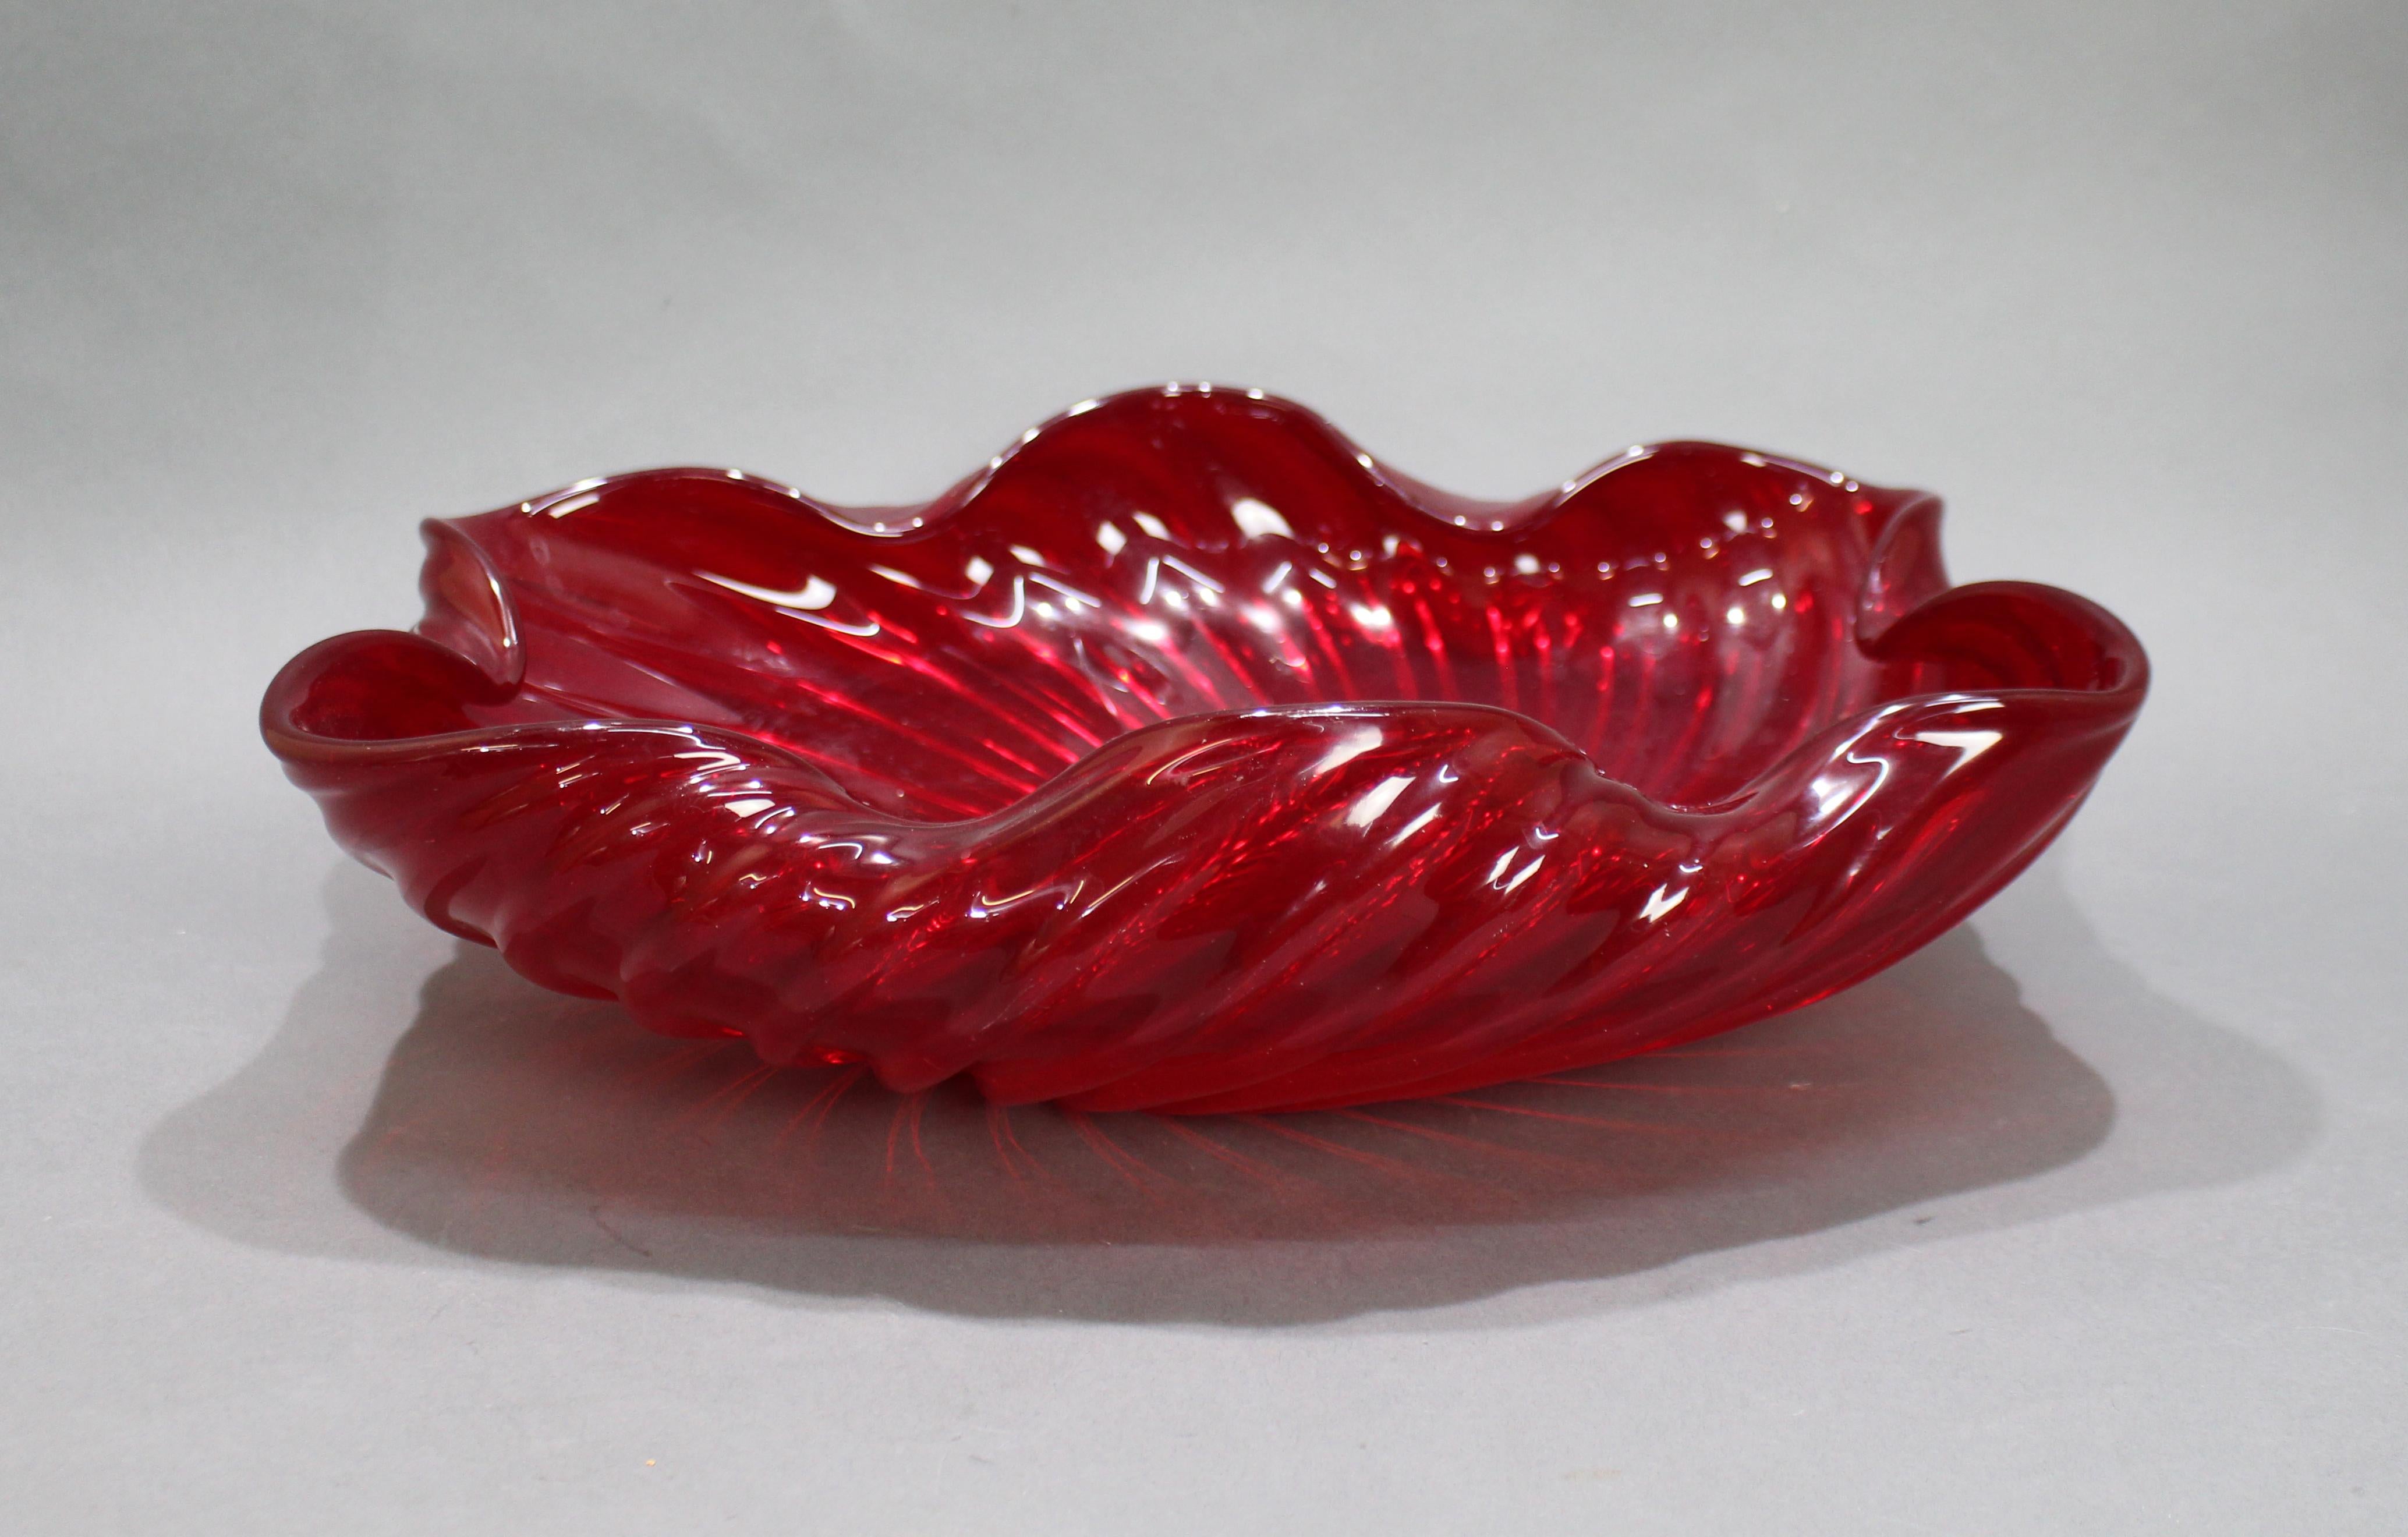 Large vintage shell form murano glass bowl


Vintage 20th century hand made Murano ruby glass bowl. 

Beautifully crafted in the form of a shell. 

Very heavy. 

Measures 40 x 31 x 12 (height) cm. 

Good condition; no chips or cracks,